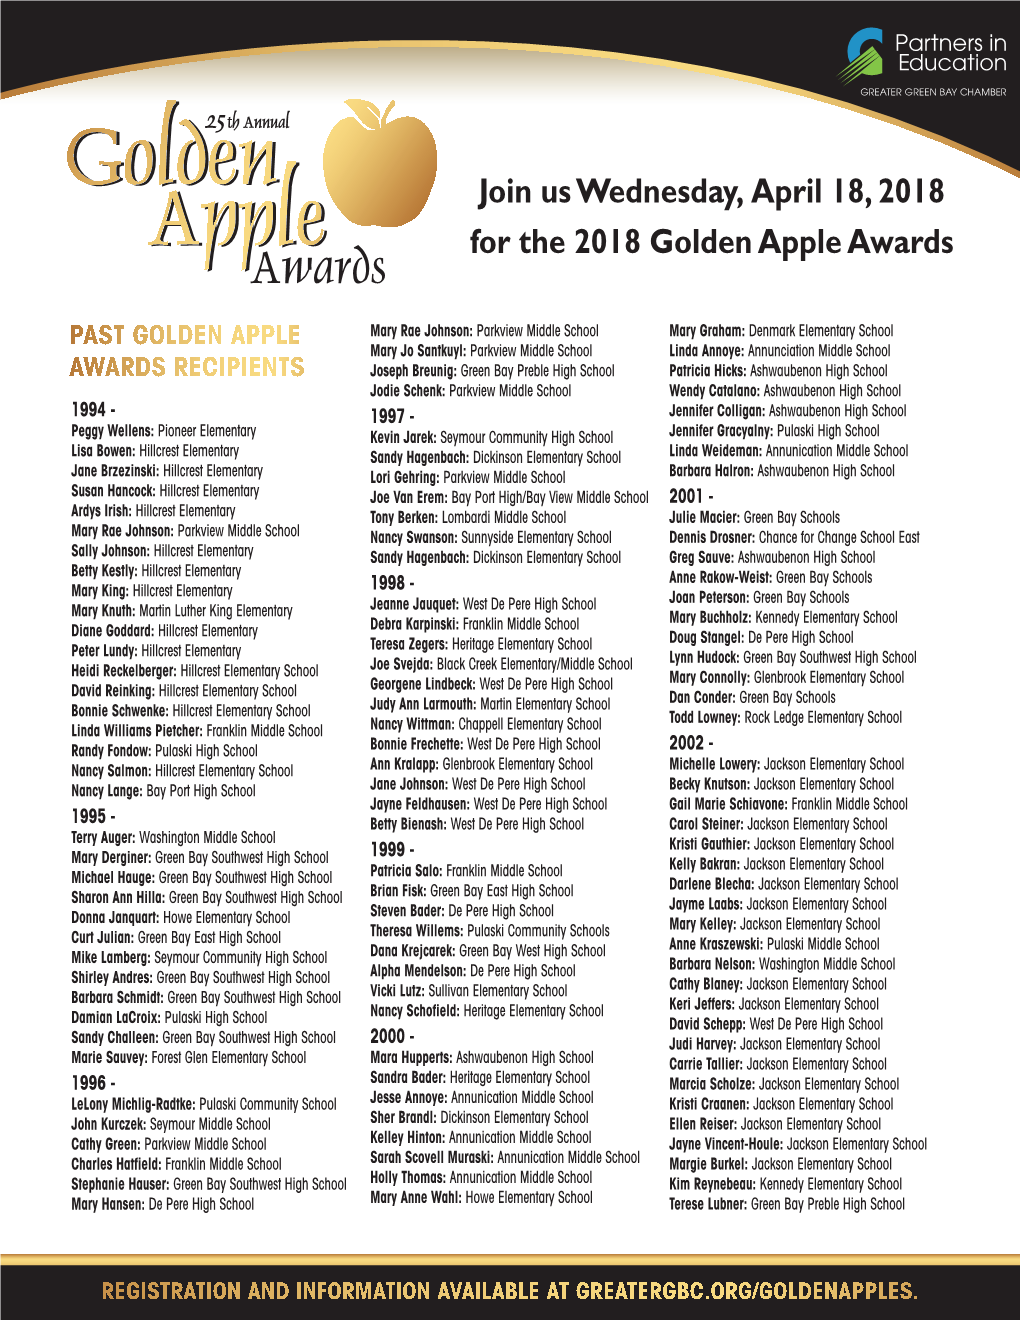 Join Us Wednesday, April 18, 2018 for the 2018 Golden Apple Awards